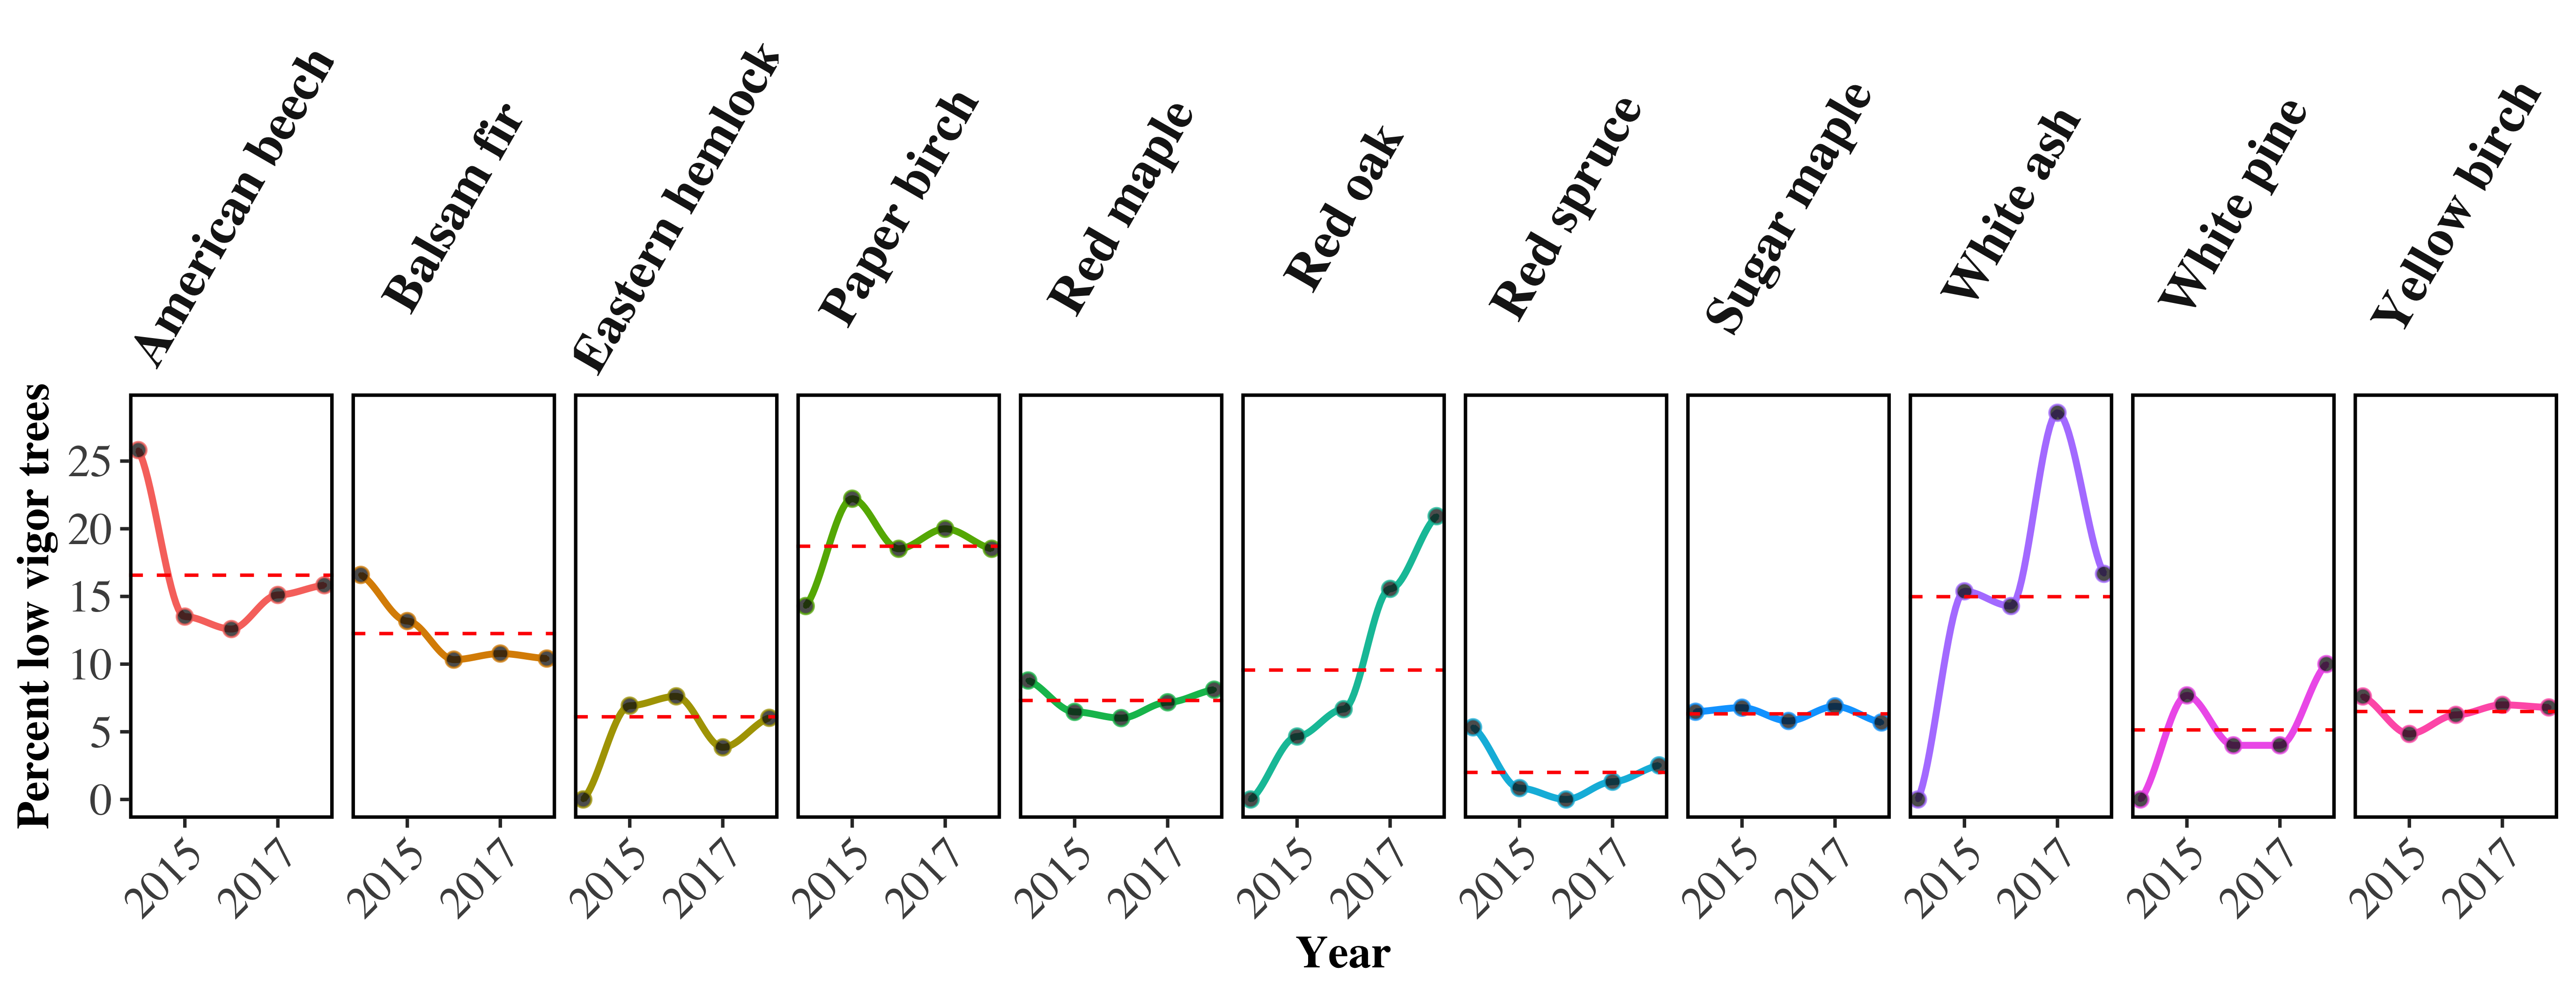 Figure 4: Percentage of trees assessed as having “poor vigor” over a 5-year period from 2014-2018. Red dashed line shows the long-term mean (2014-2018) for each species.